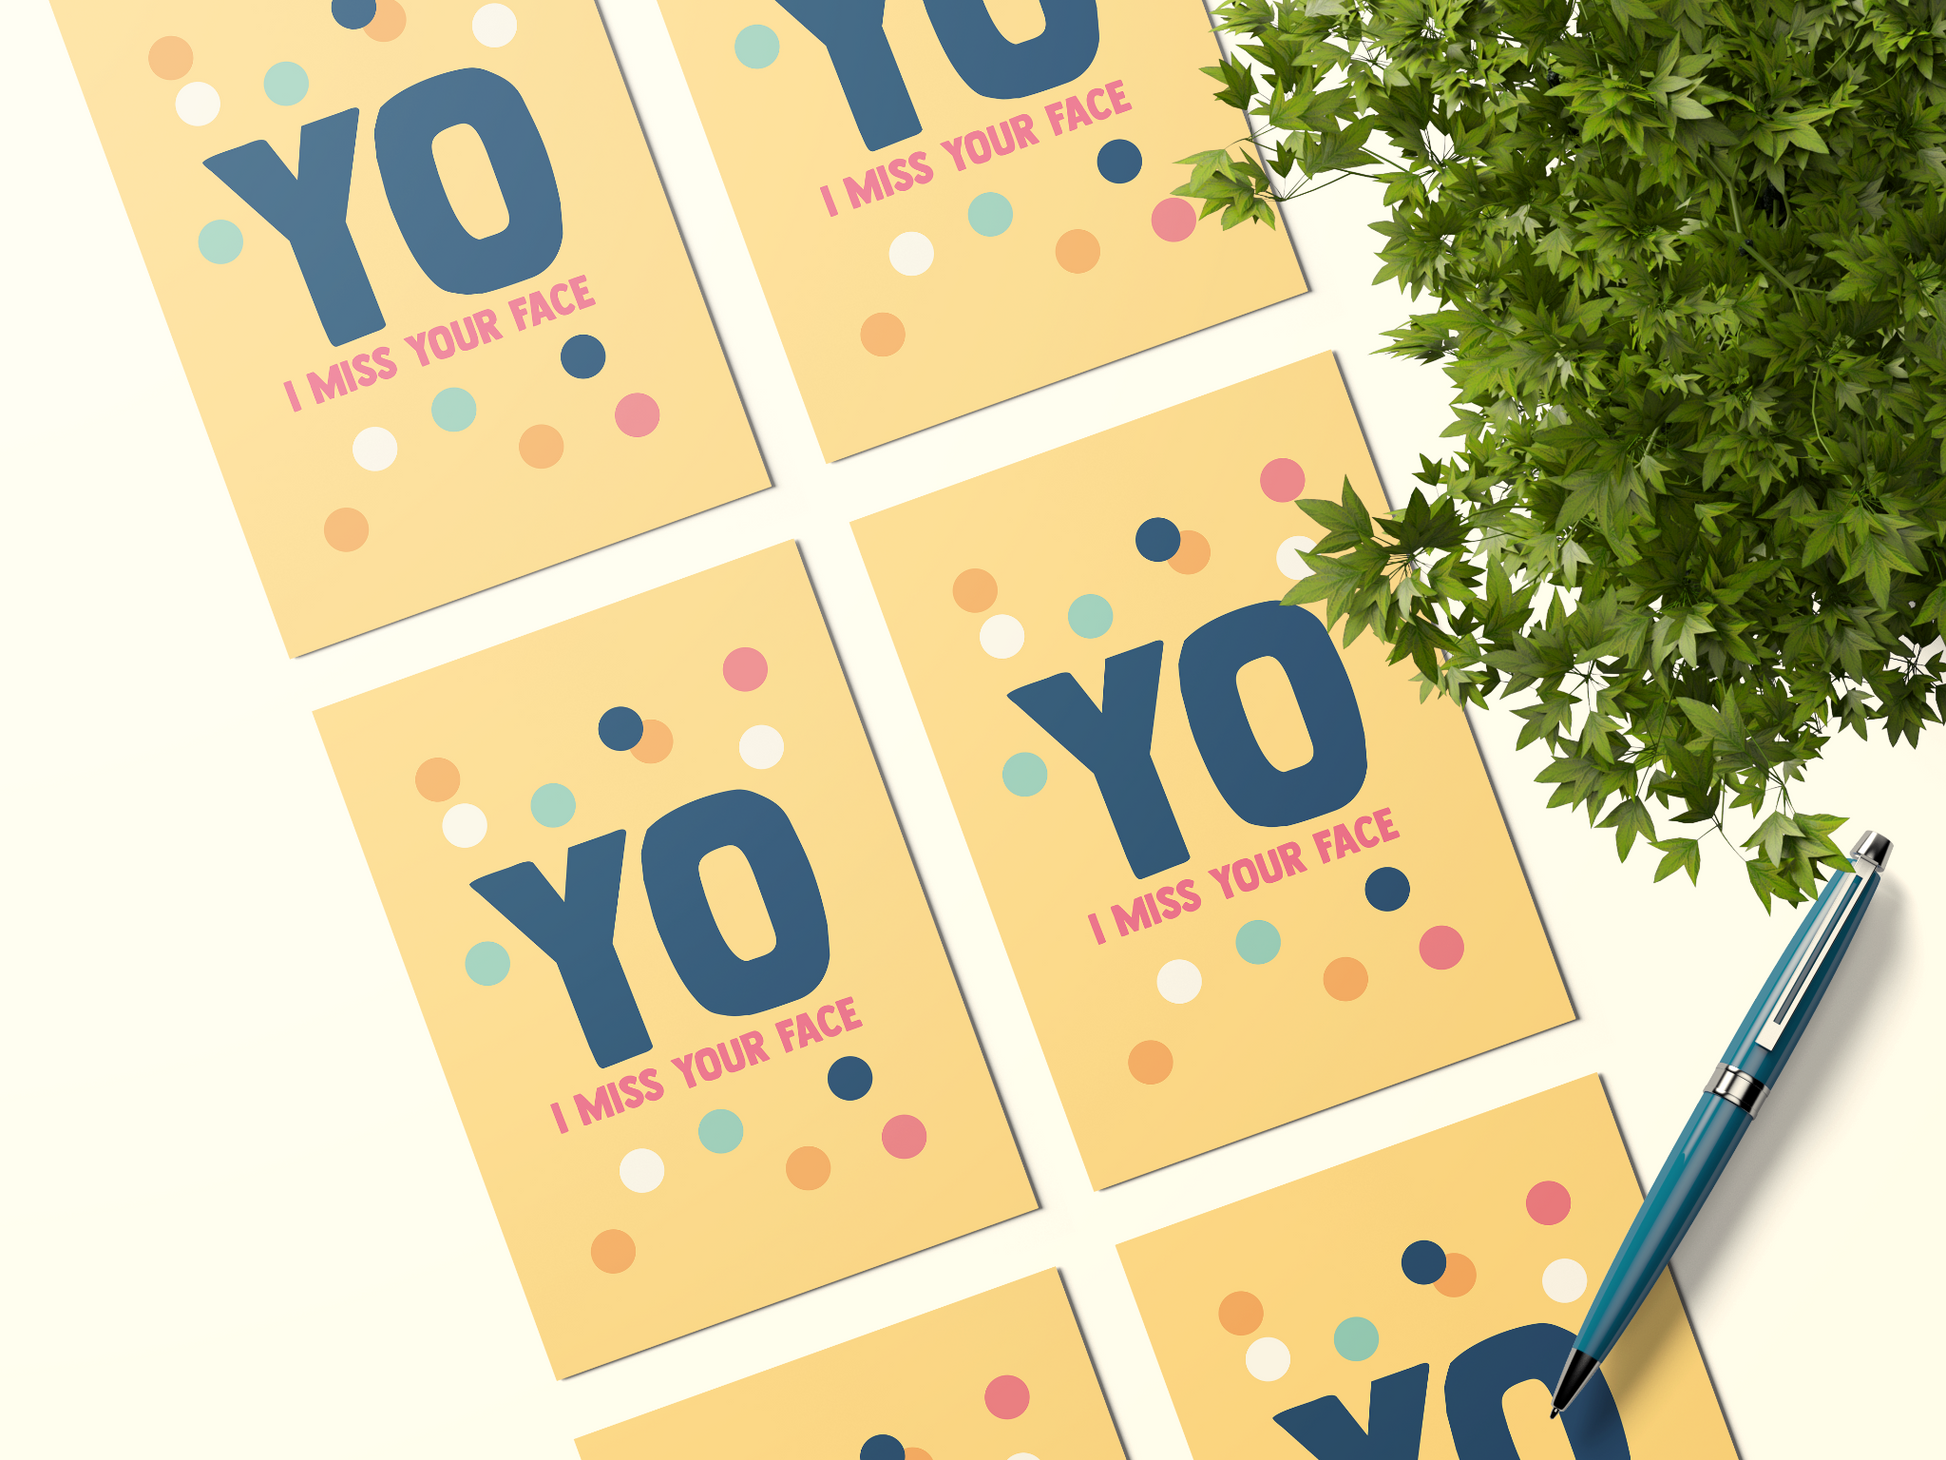 Yo I Miss Your Face Postcard Pack - Pack of 5 or 10.